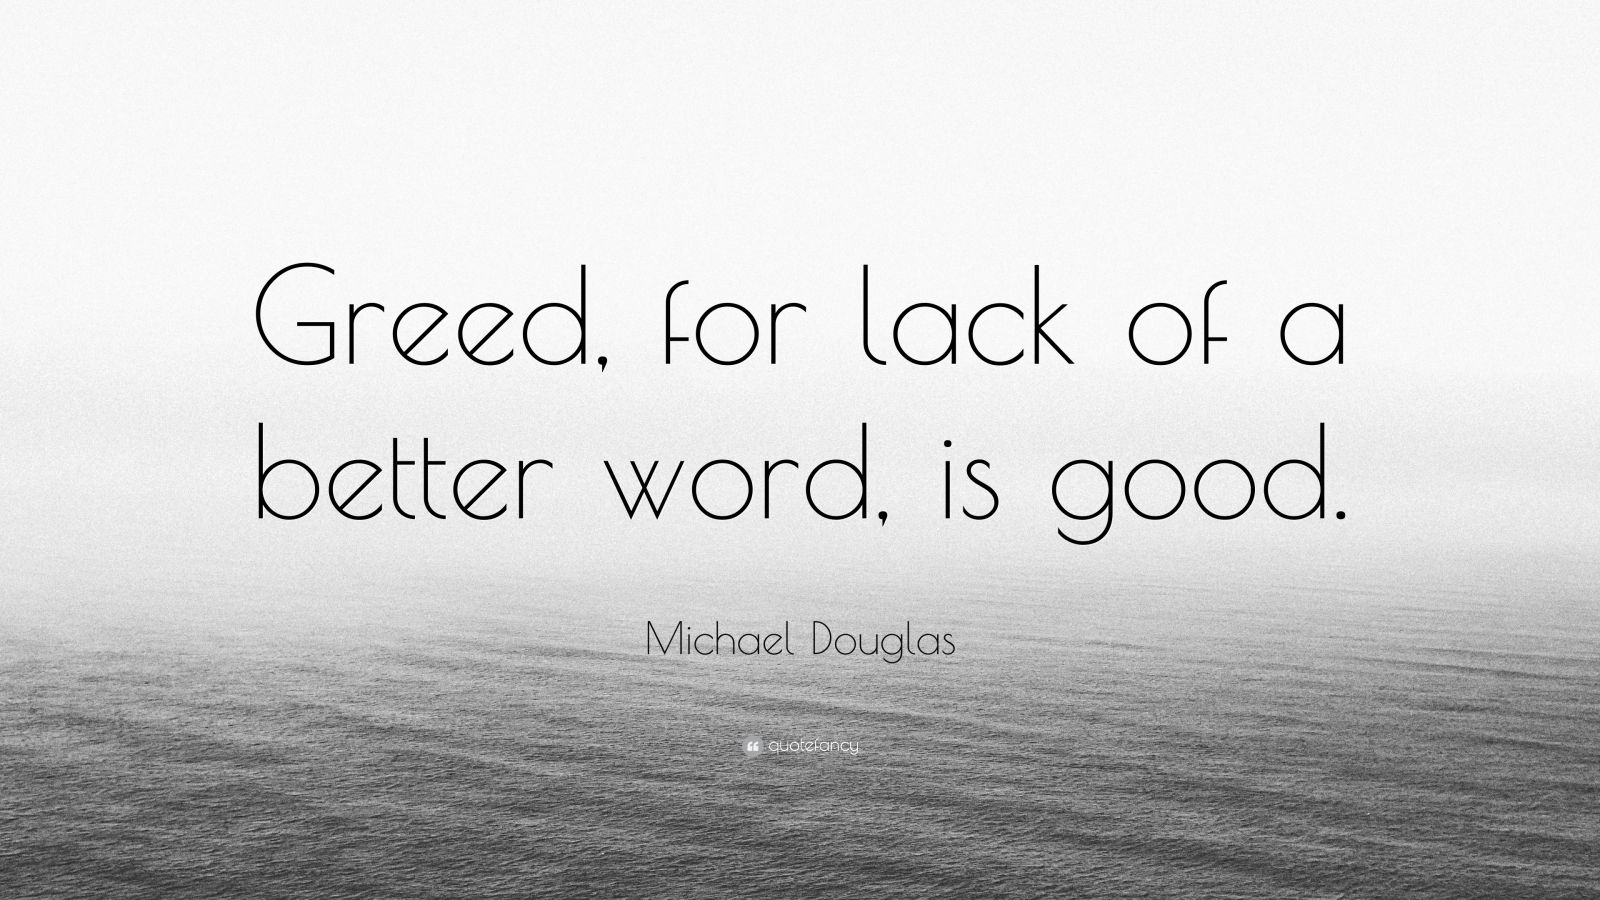 Michael Douglas Quote: "Greed, for lack of a better word ...